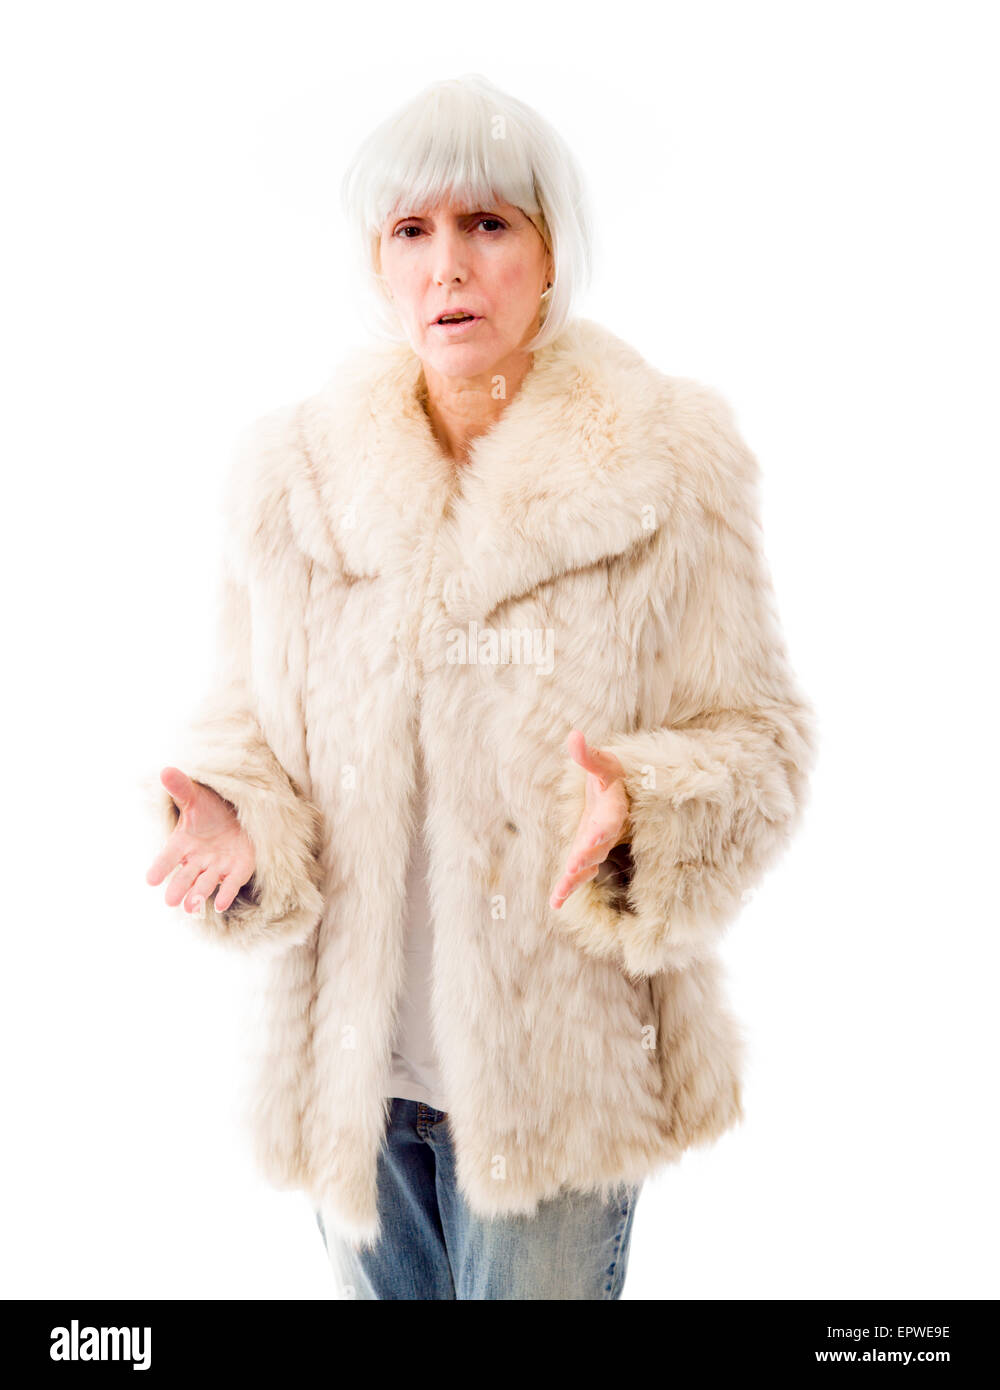 Senior woman in gesture of asking Stock Photo